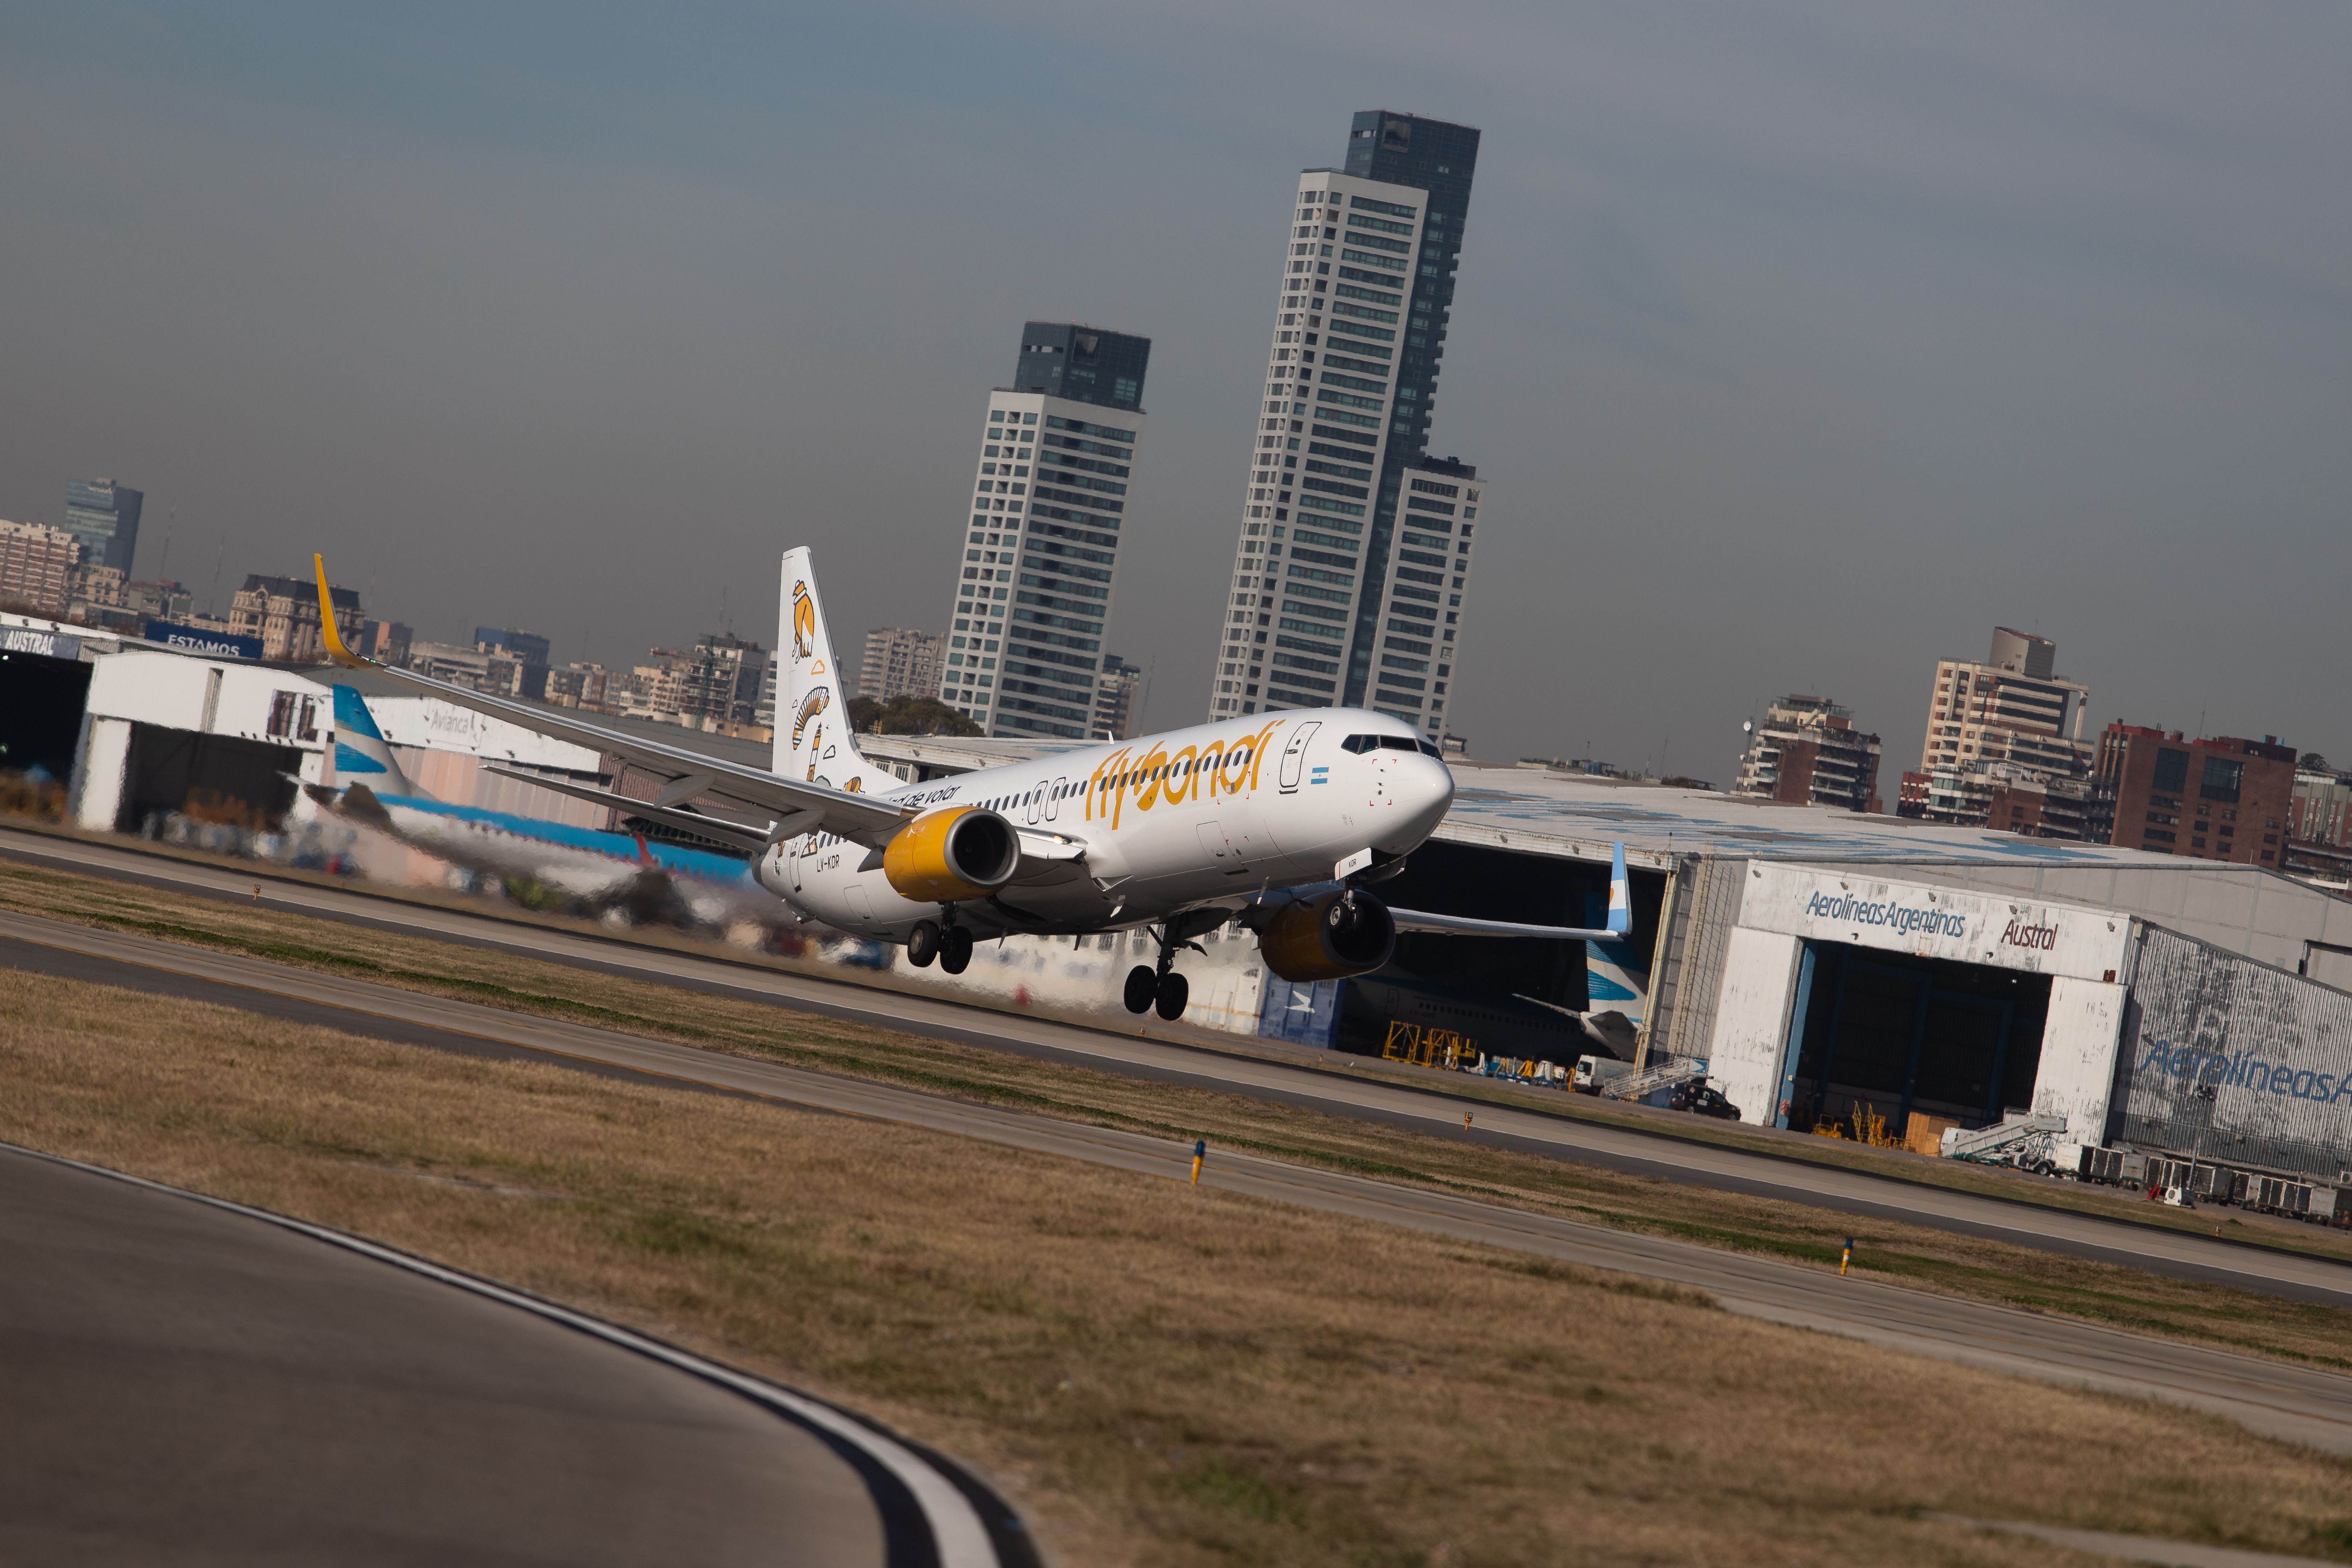 A Flybondi aircraft departing from Buenos Aires